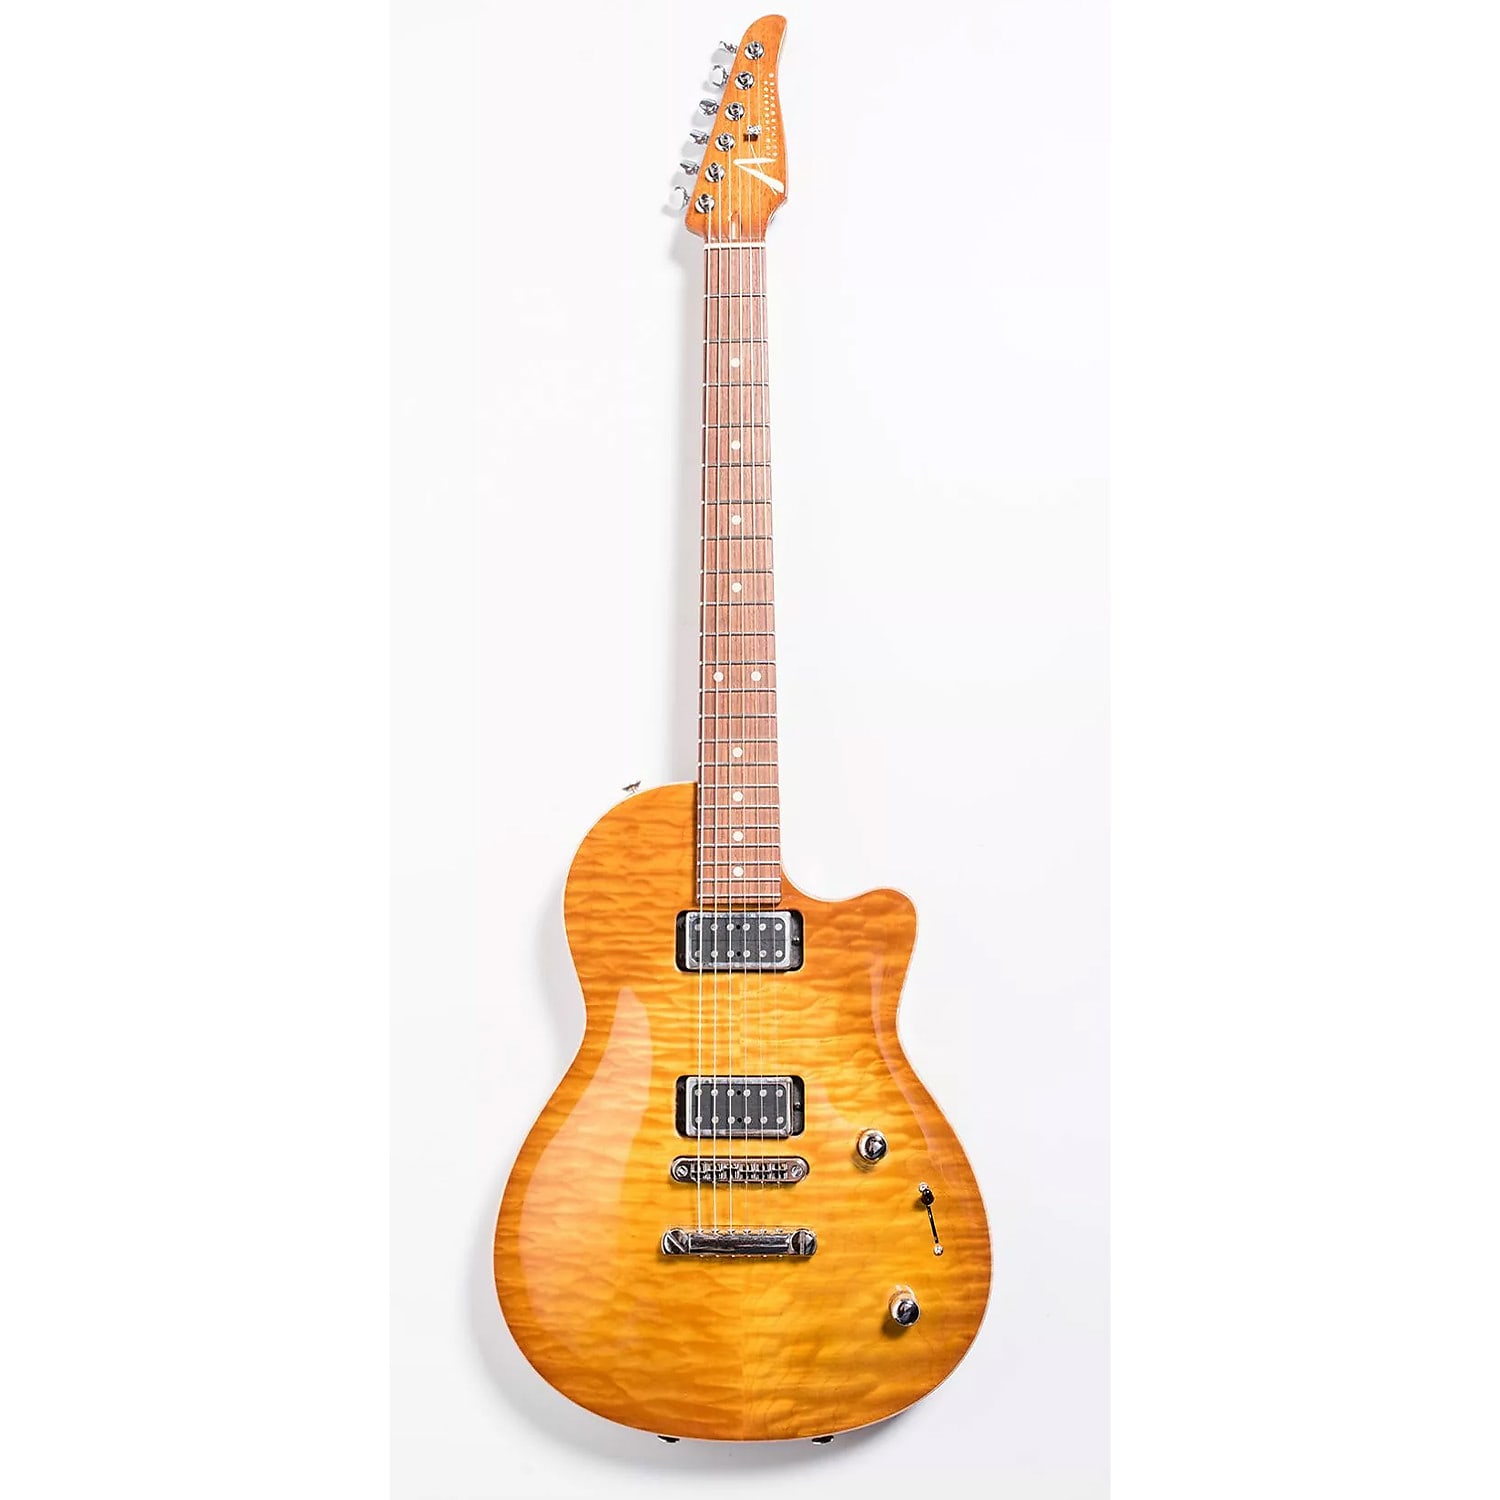 Tom Anderson Atom CT Flame Top | Reverb